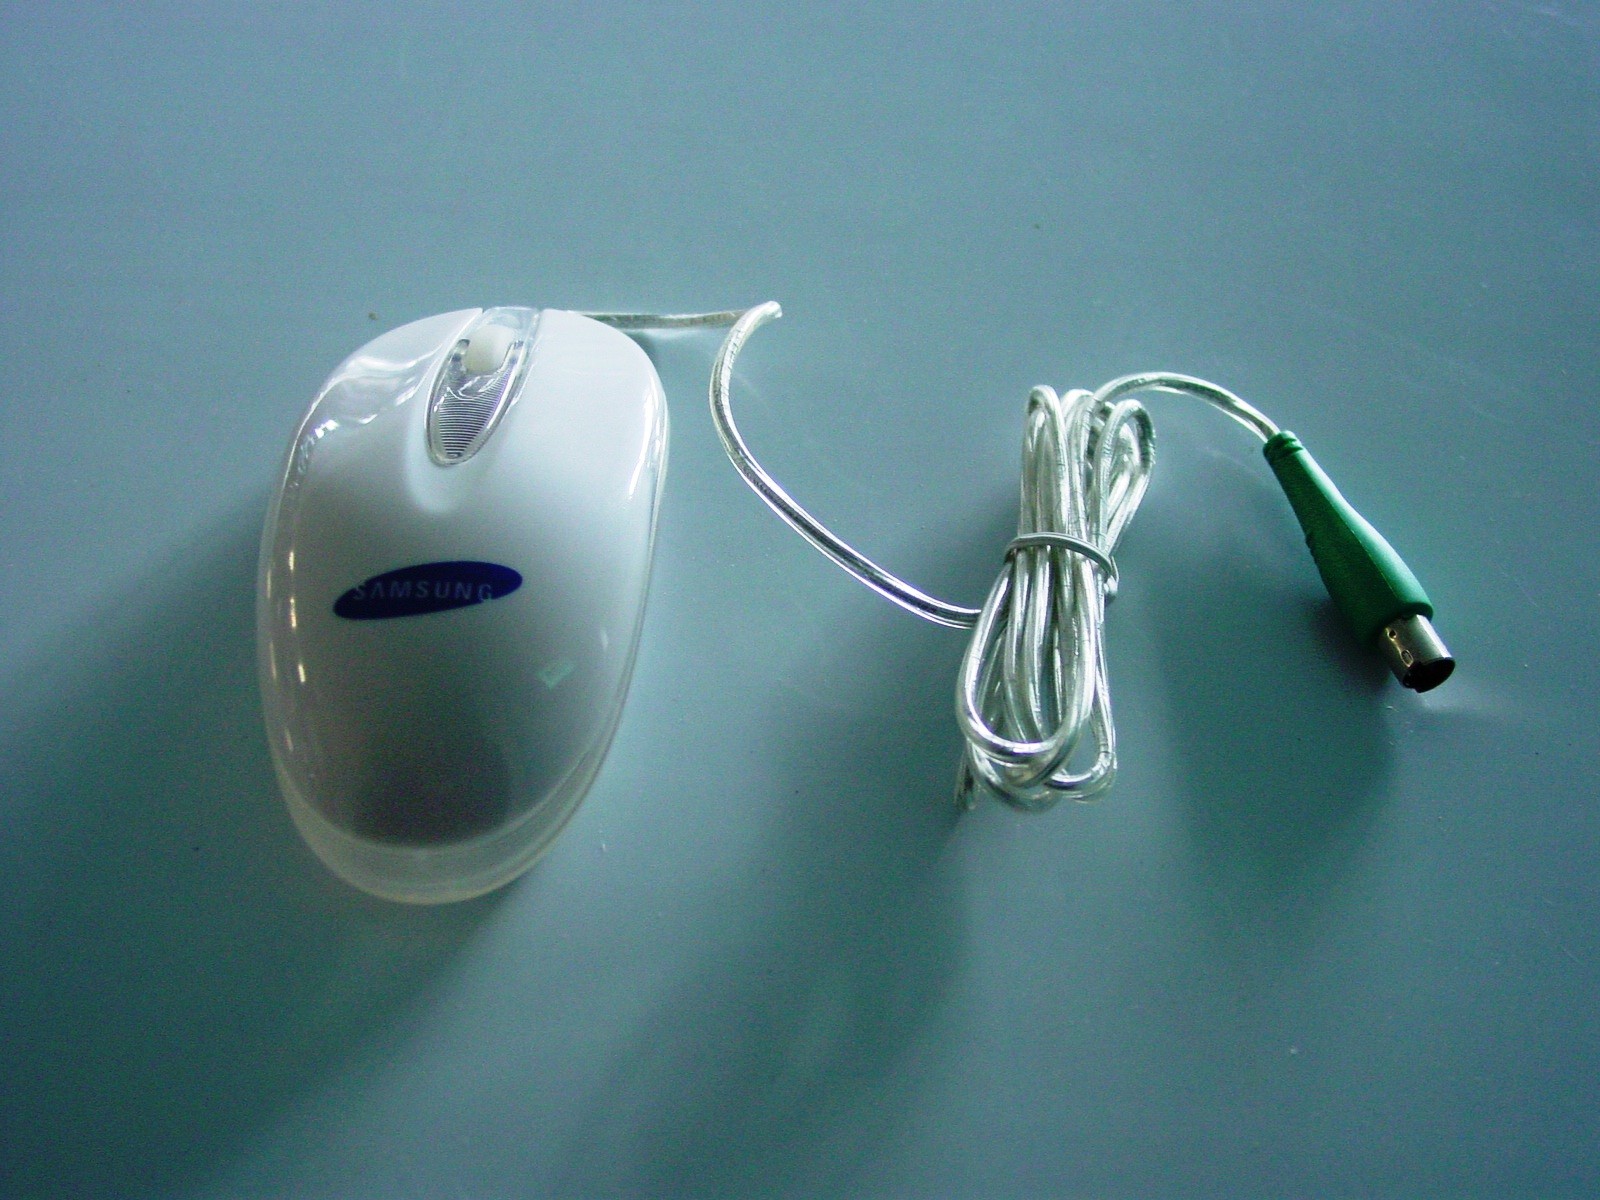 =PS/2 optical mouse, pearl white